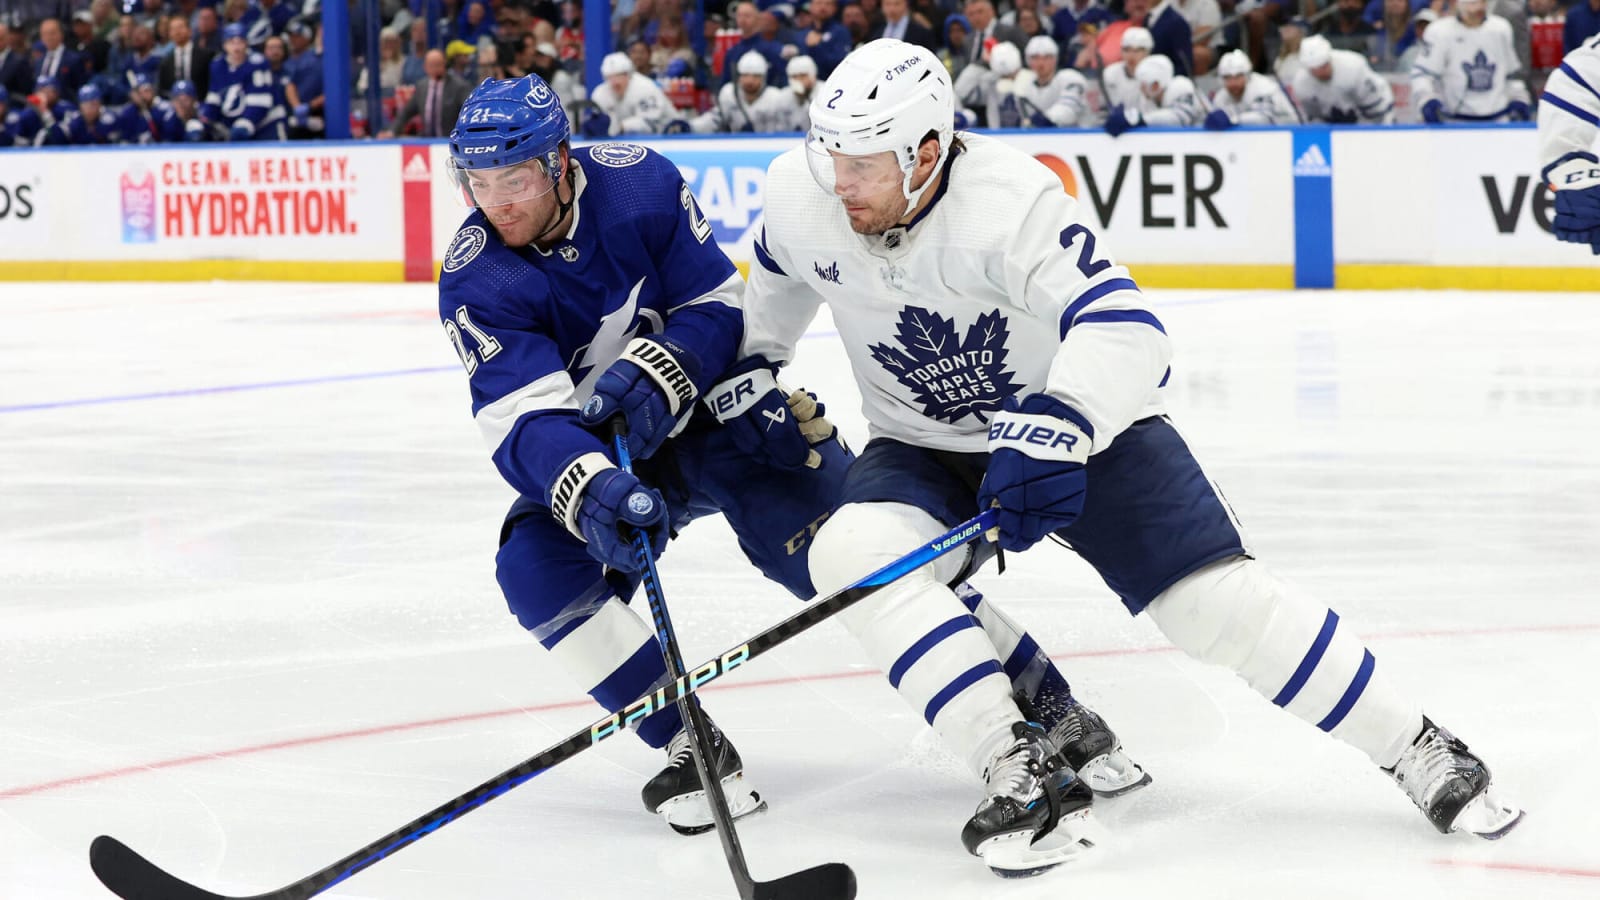 Luke Schenn is proving his playoff worth for the Toronto Maple Leafs